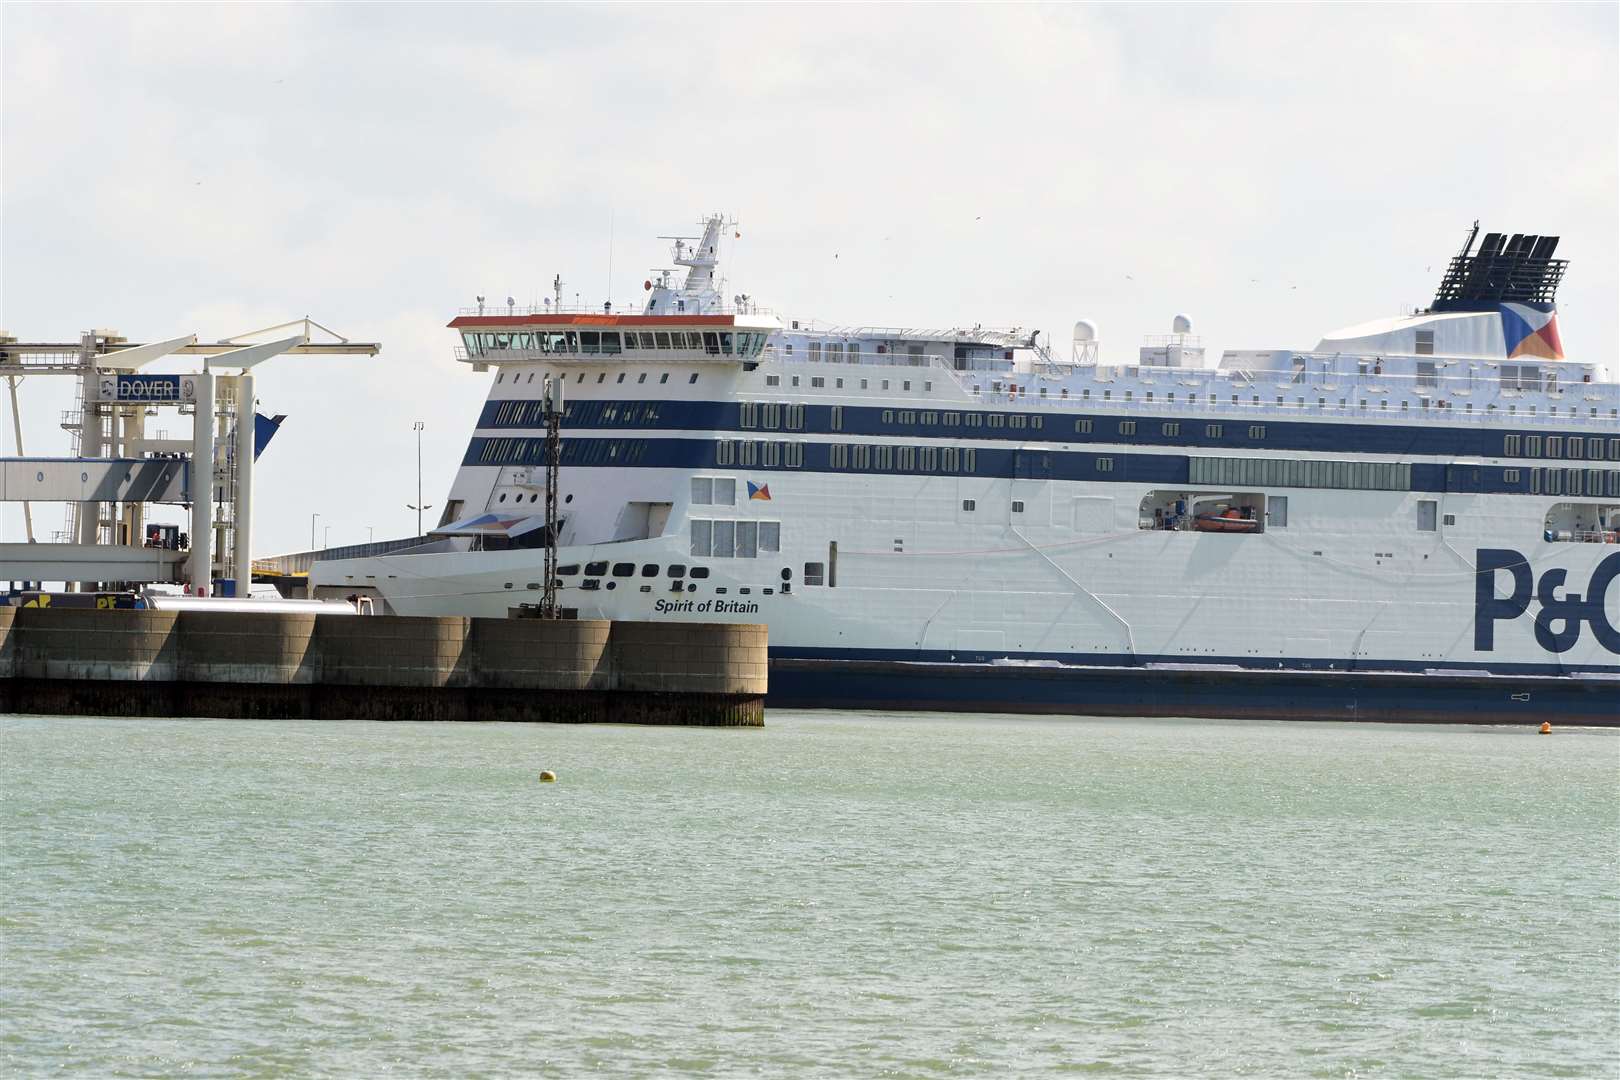 The Spirit of Britain returns to the port of Dover after completing a sea trial over to Calais and back Picture: Barry Goodwin